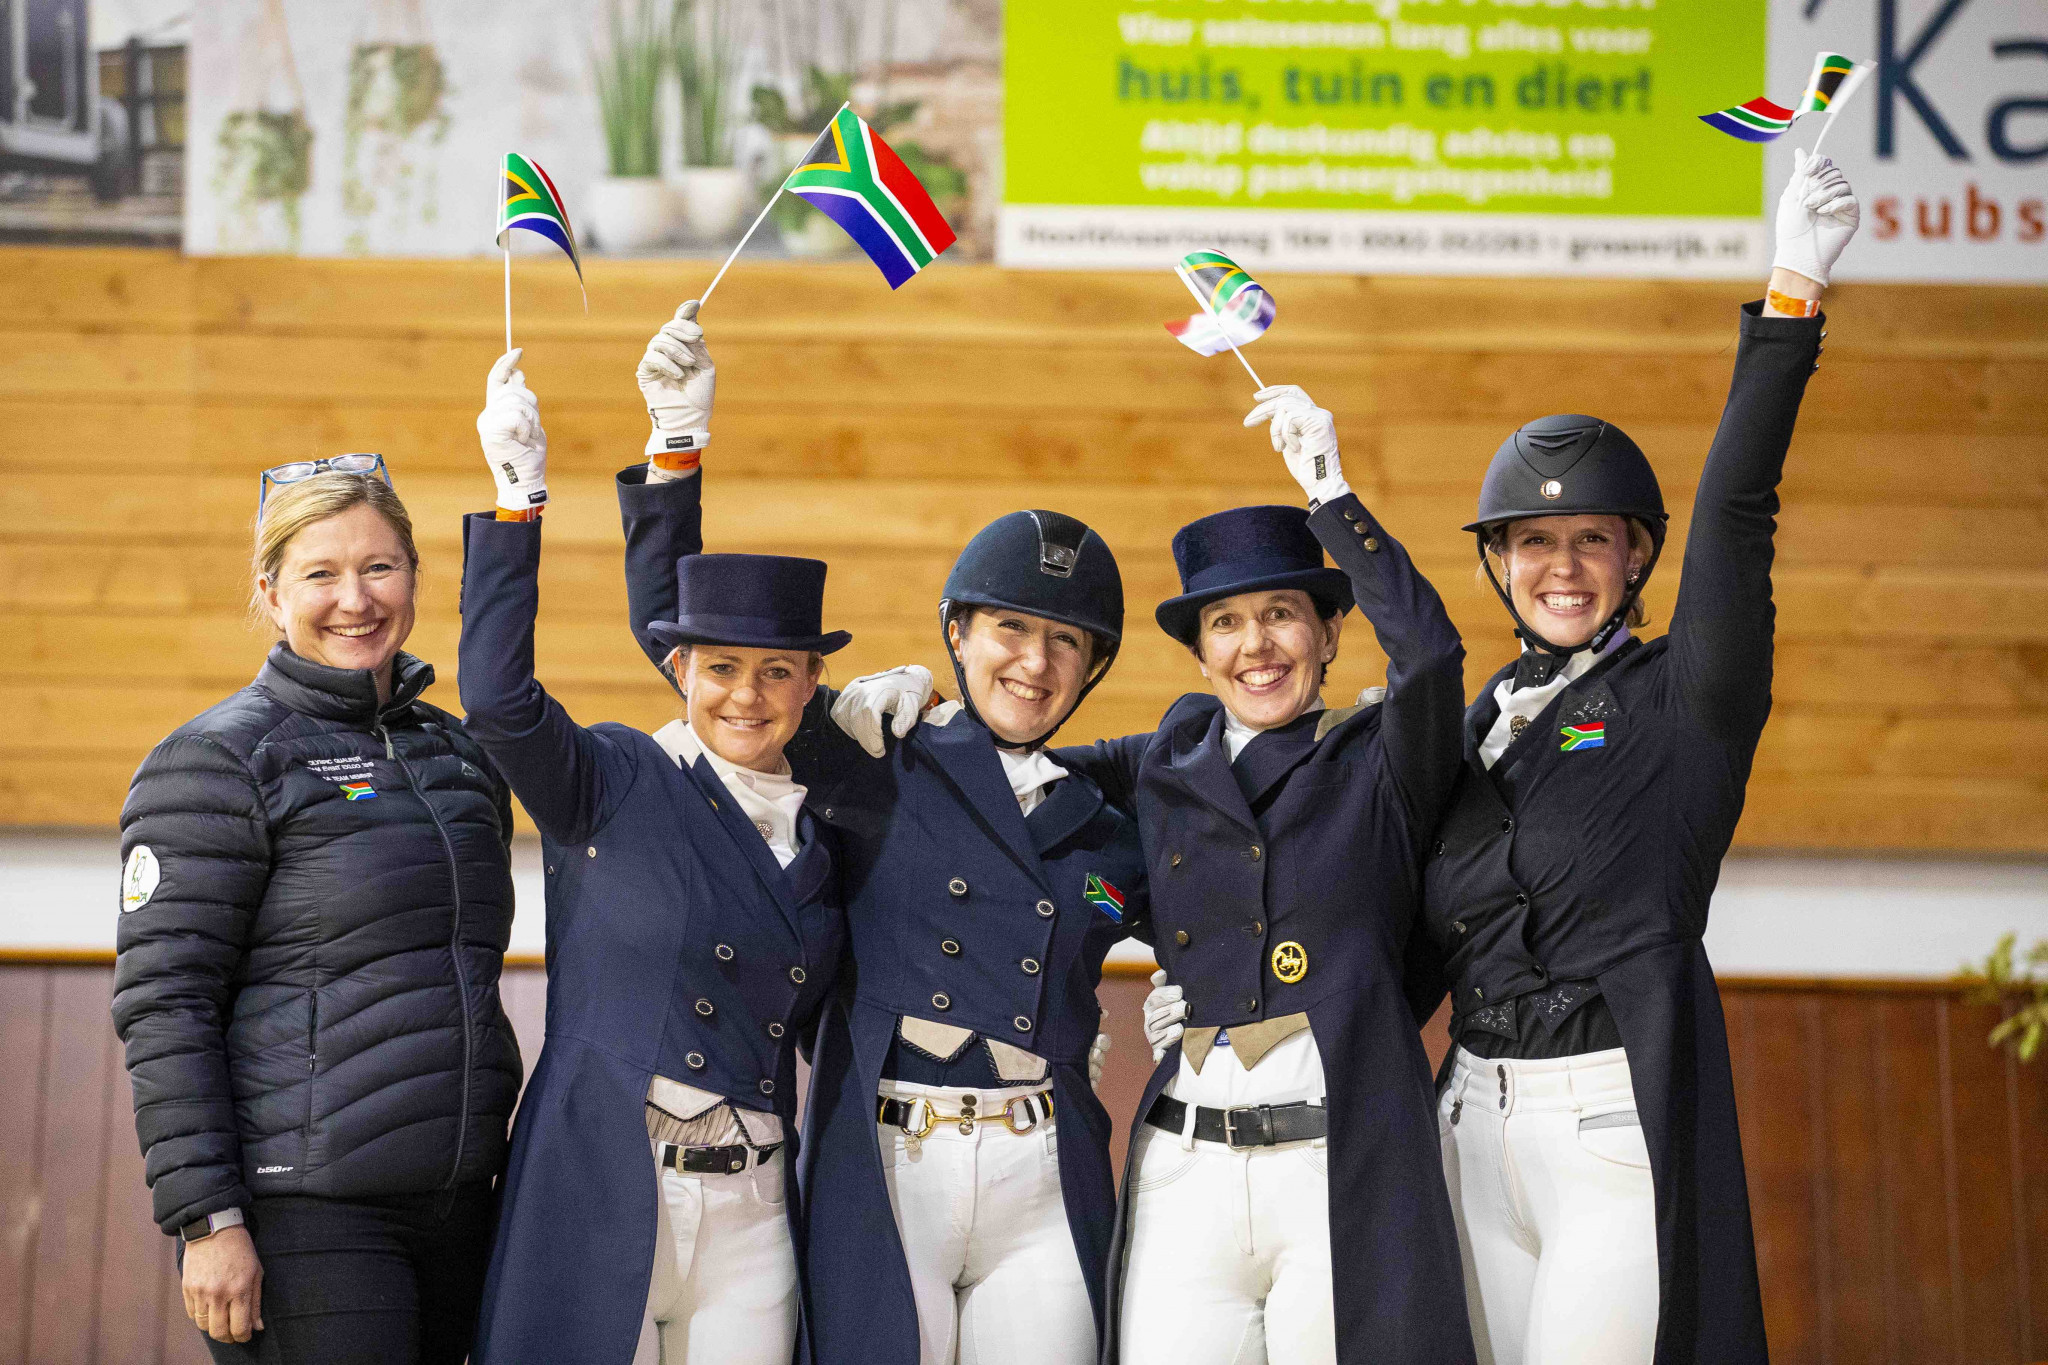 South Africa's dressage squad celebrate qualifying for next year's Olympic Games in Tokyo ©FEI